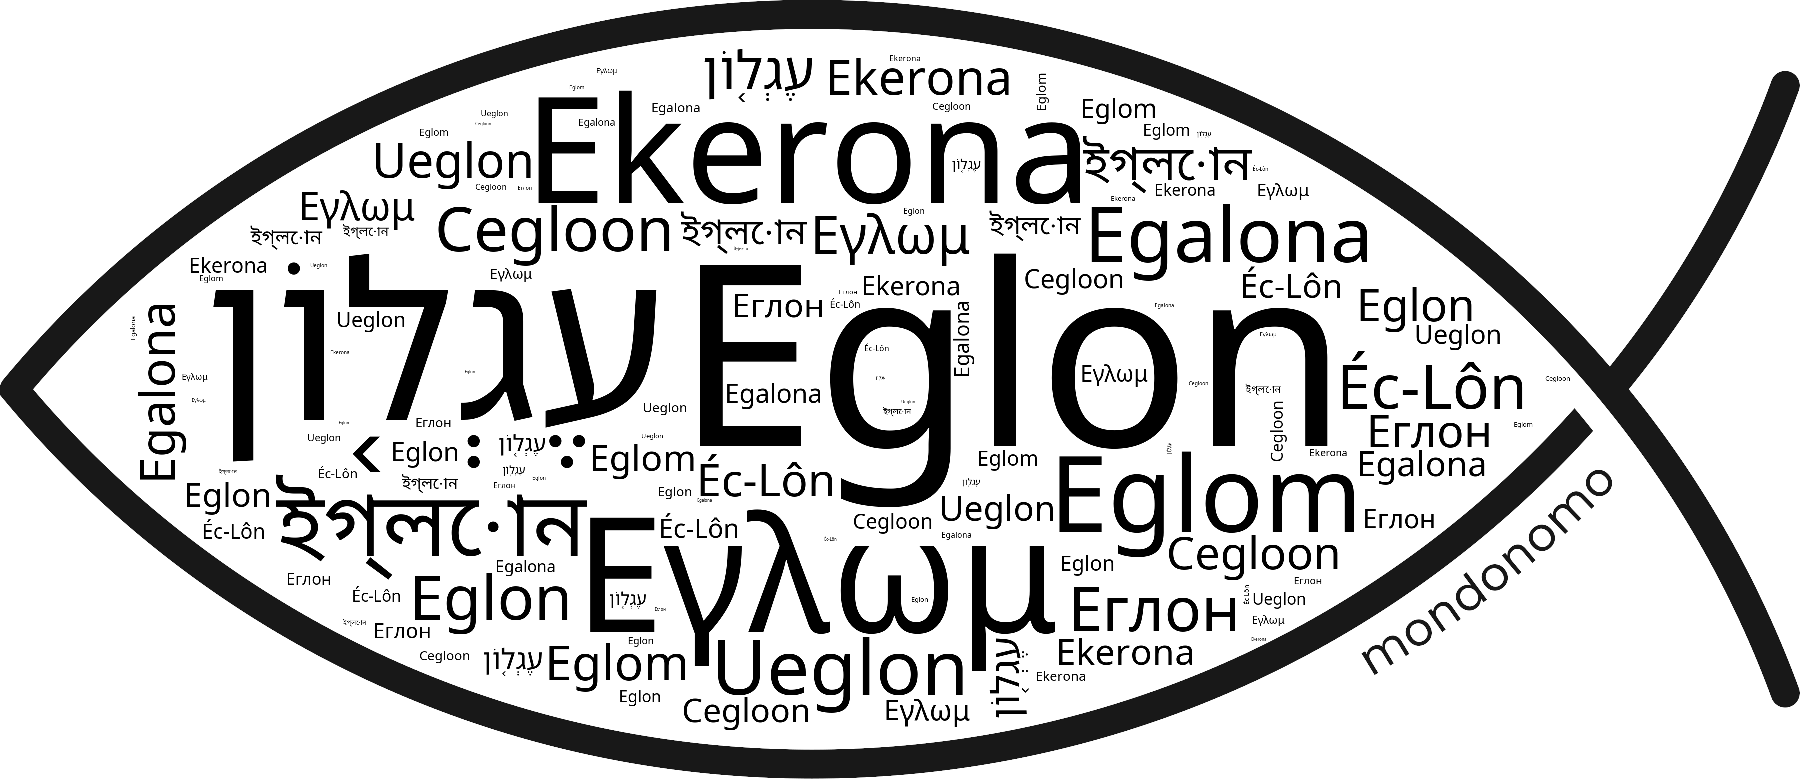 Name Eglon in the world's Bibles